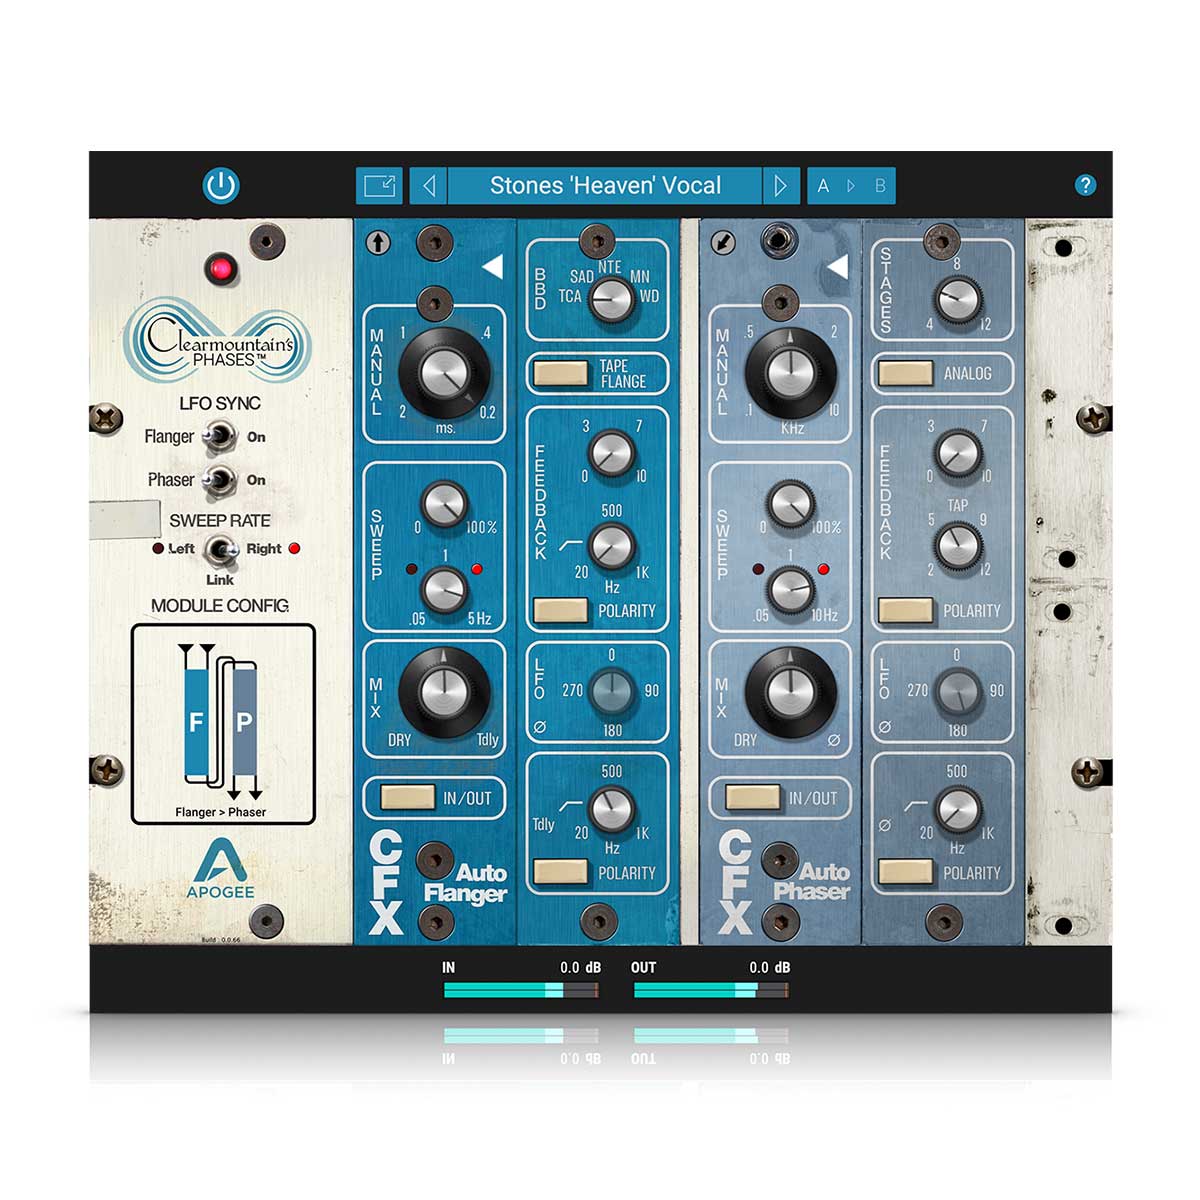 Apogee Clearmountains Phases (Serial Nr + Download)